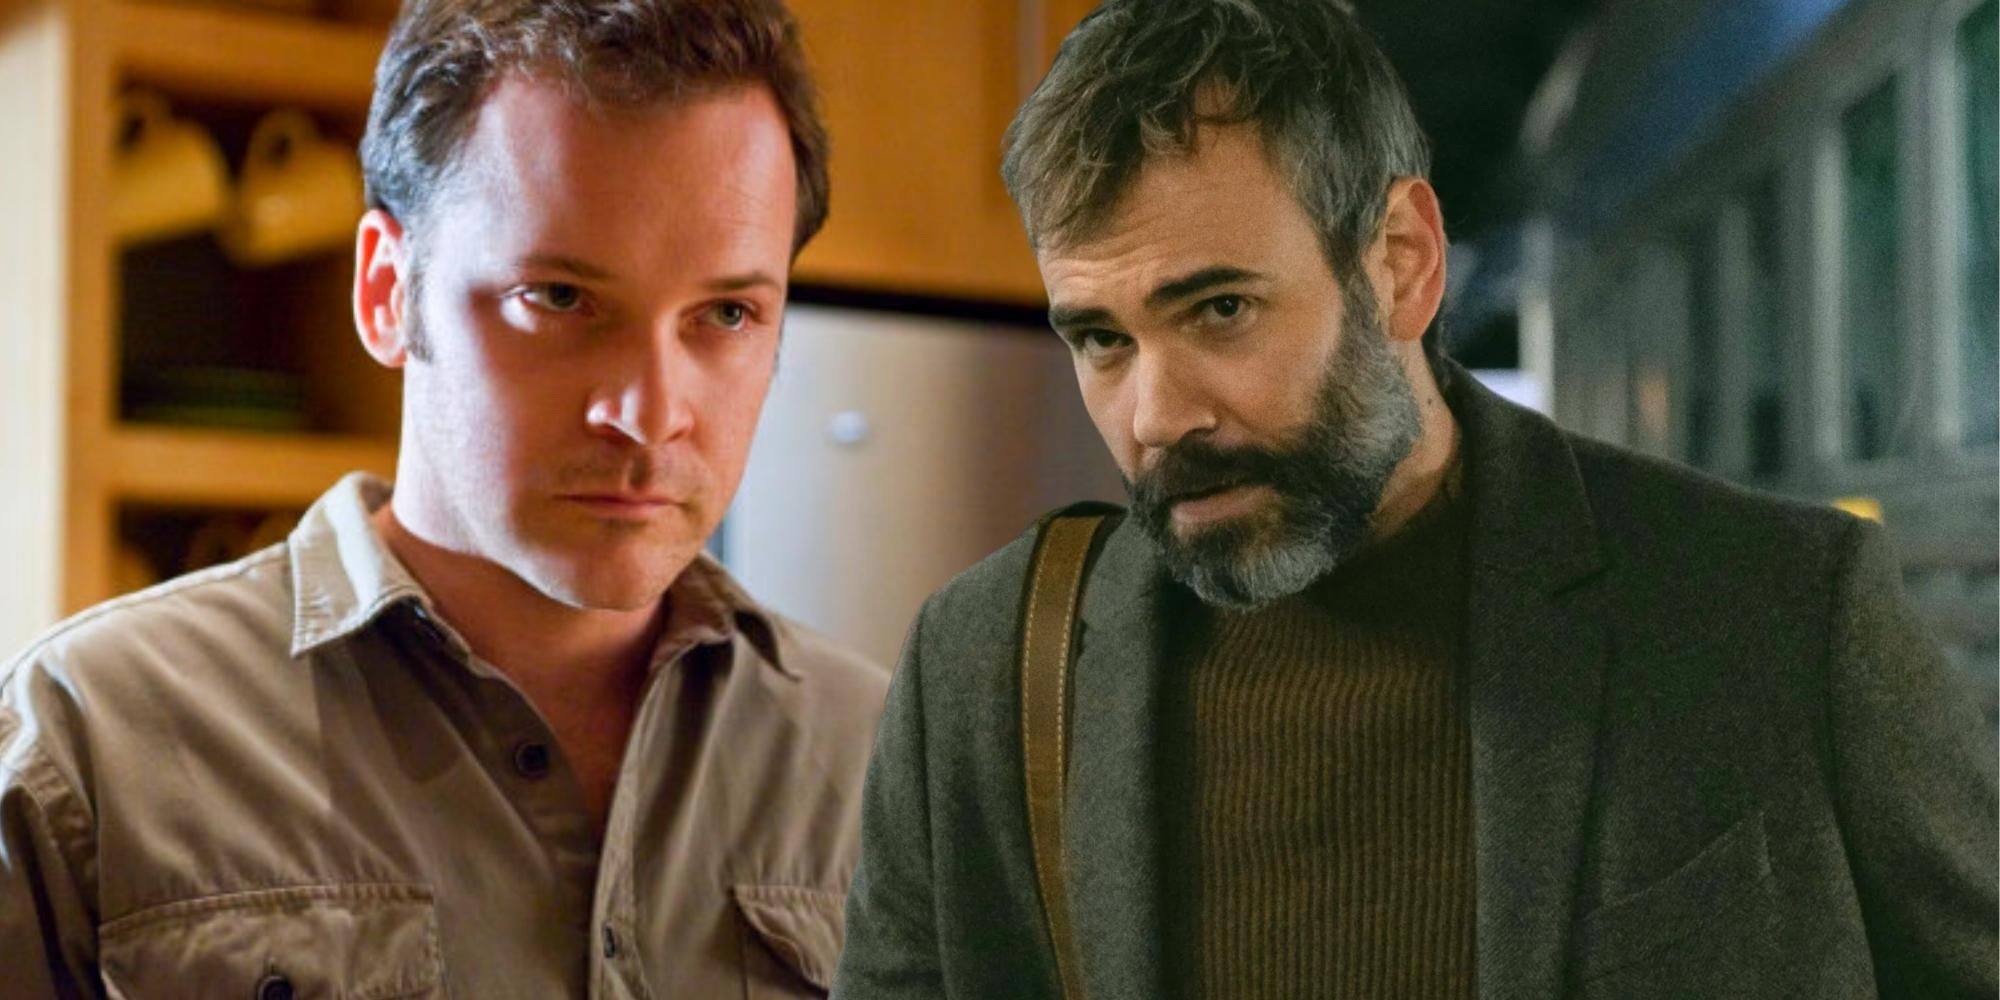 Peter Sarsgaard as John in Orphan, and Rossif Sutherland as Allen in Orphan: First Kill